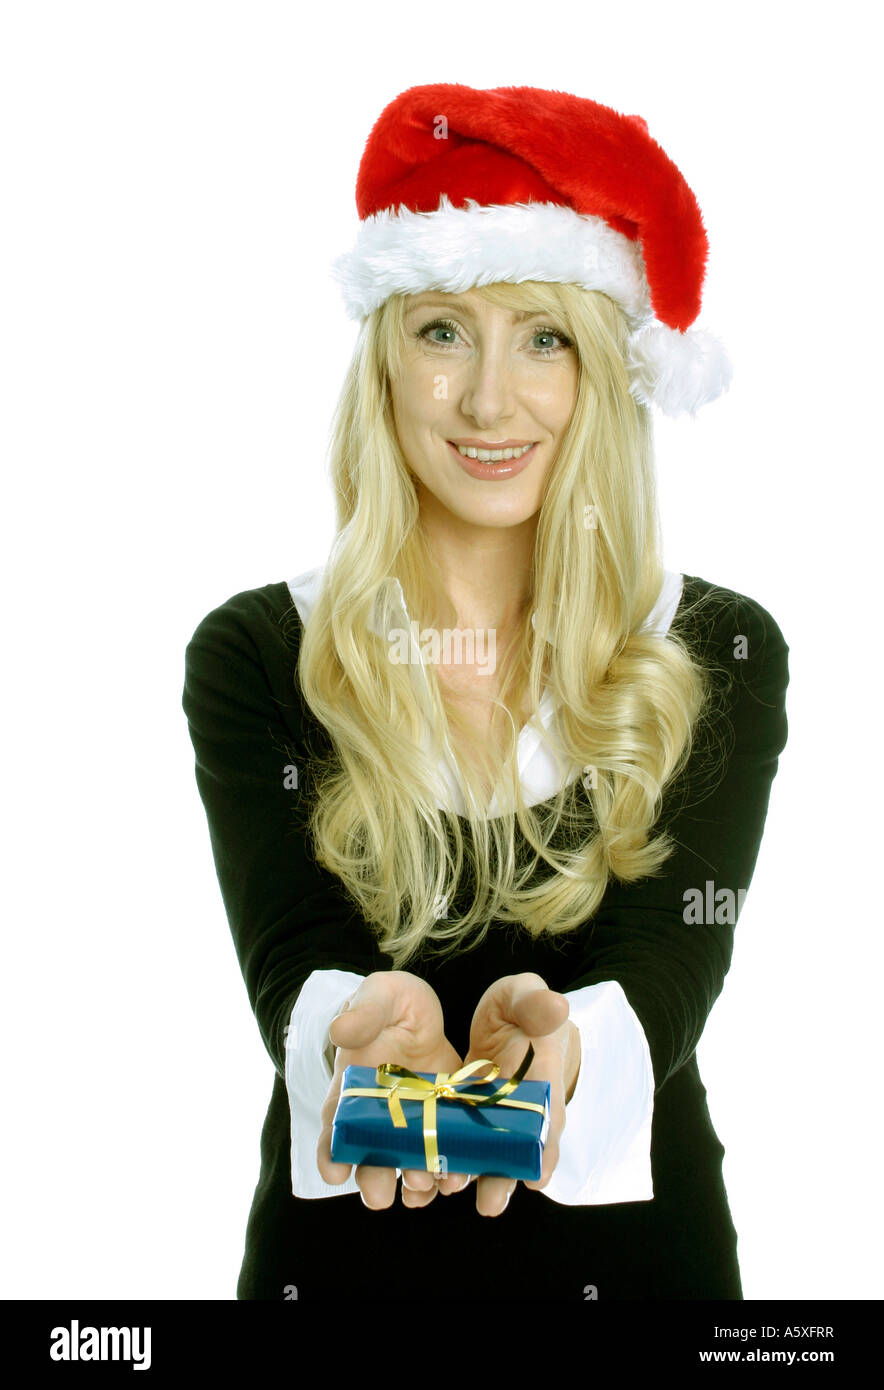 Mid adult woman wearing Santa hat and holding Christmas gift close up portrait Stock Photo